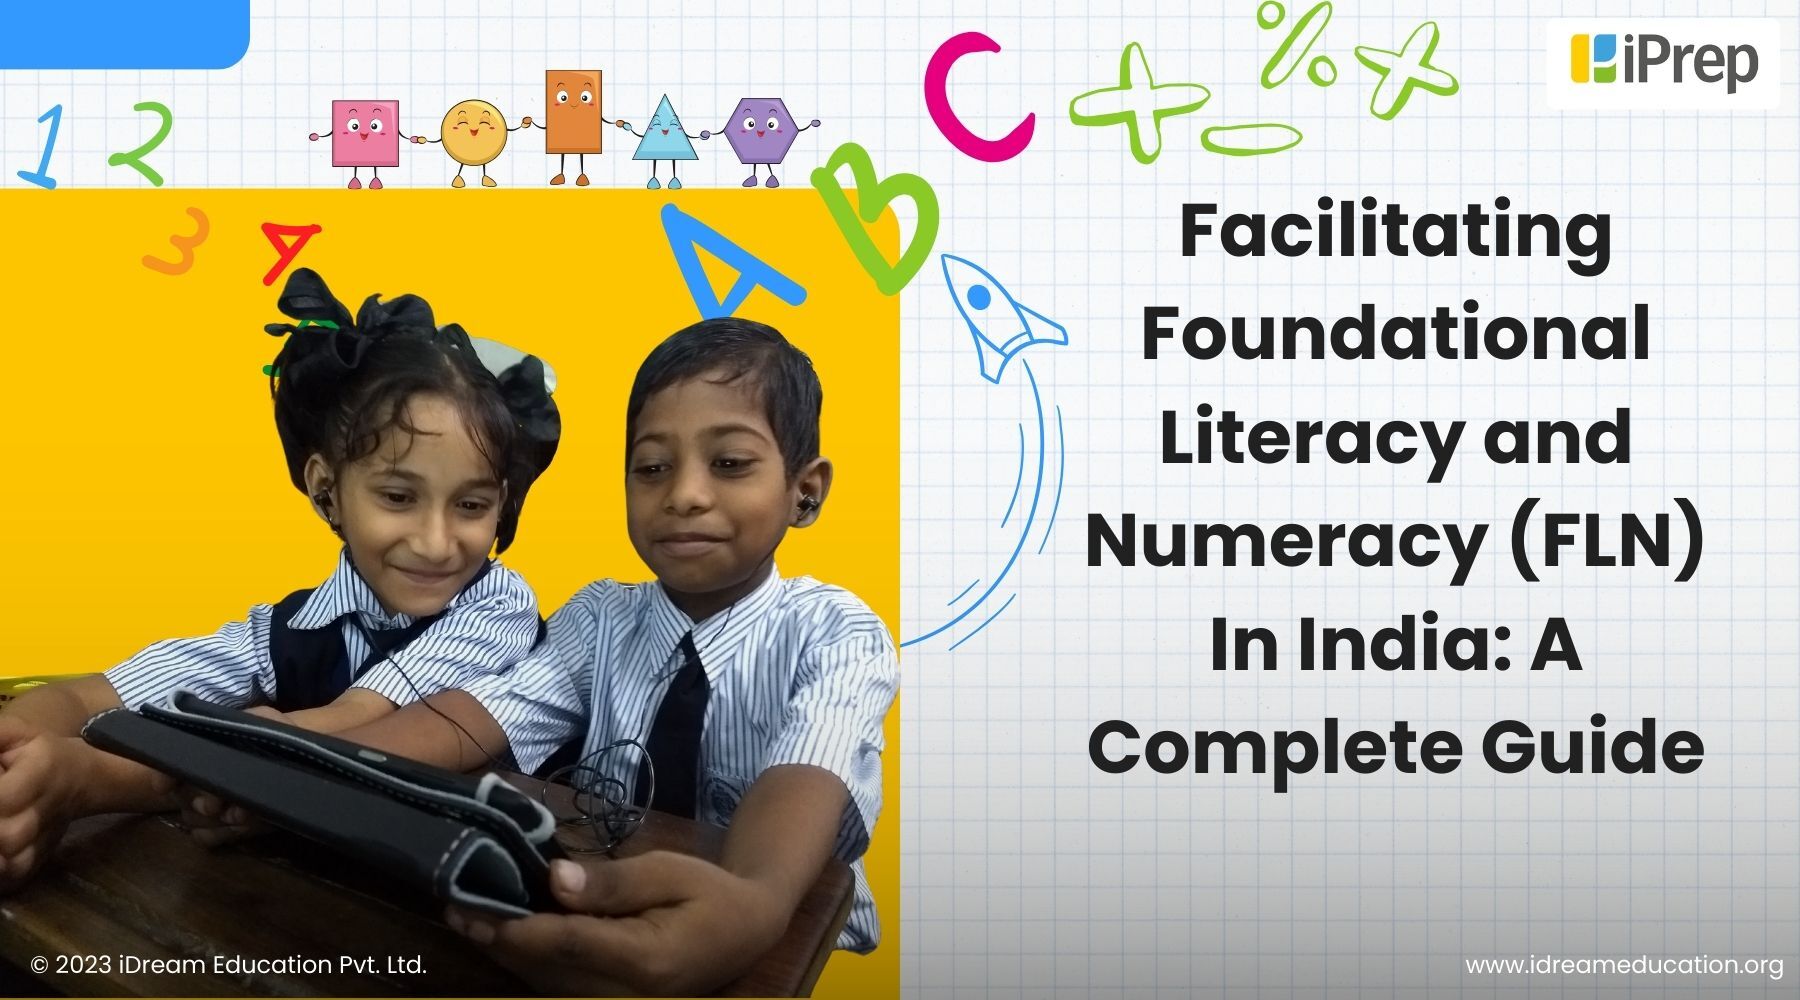 a visual depicting how iPrep’s Digital Learning Platform Can Facilitate Foundational Literacy and Numeracy in India